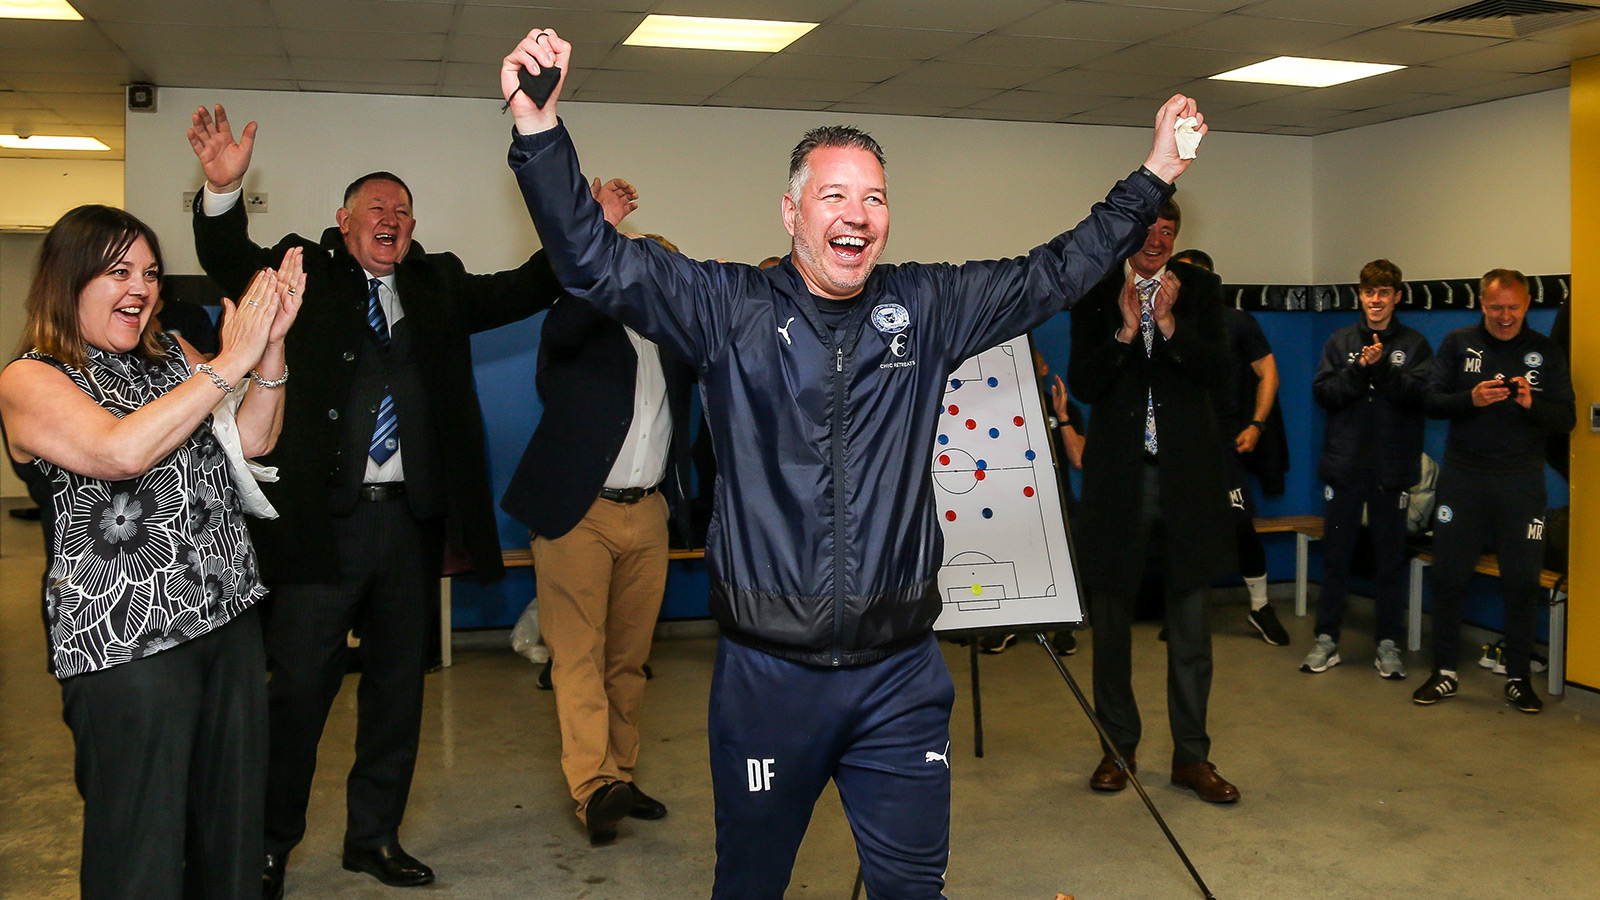 9th May '21 | The Gaffer receives a hero's reception from the players and staff in the changing room following the final game of the 20/21 season